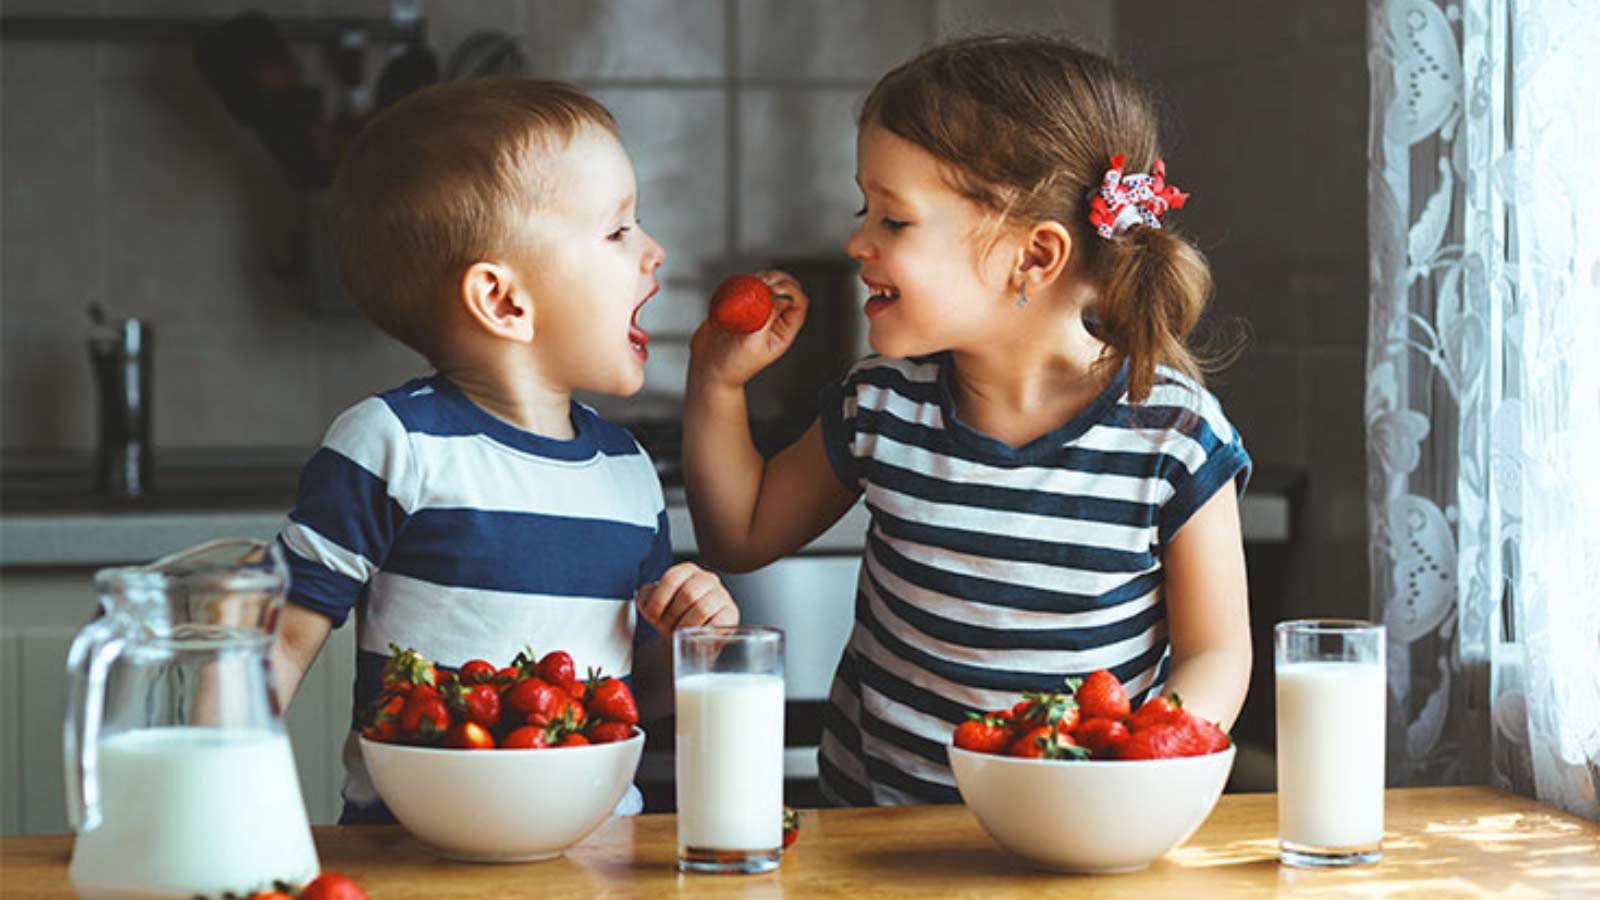 Two young kids eating strawberries.